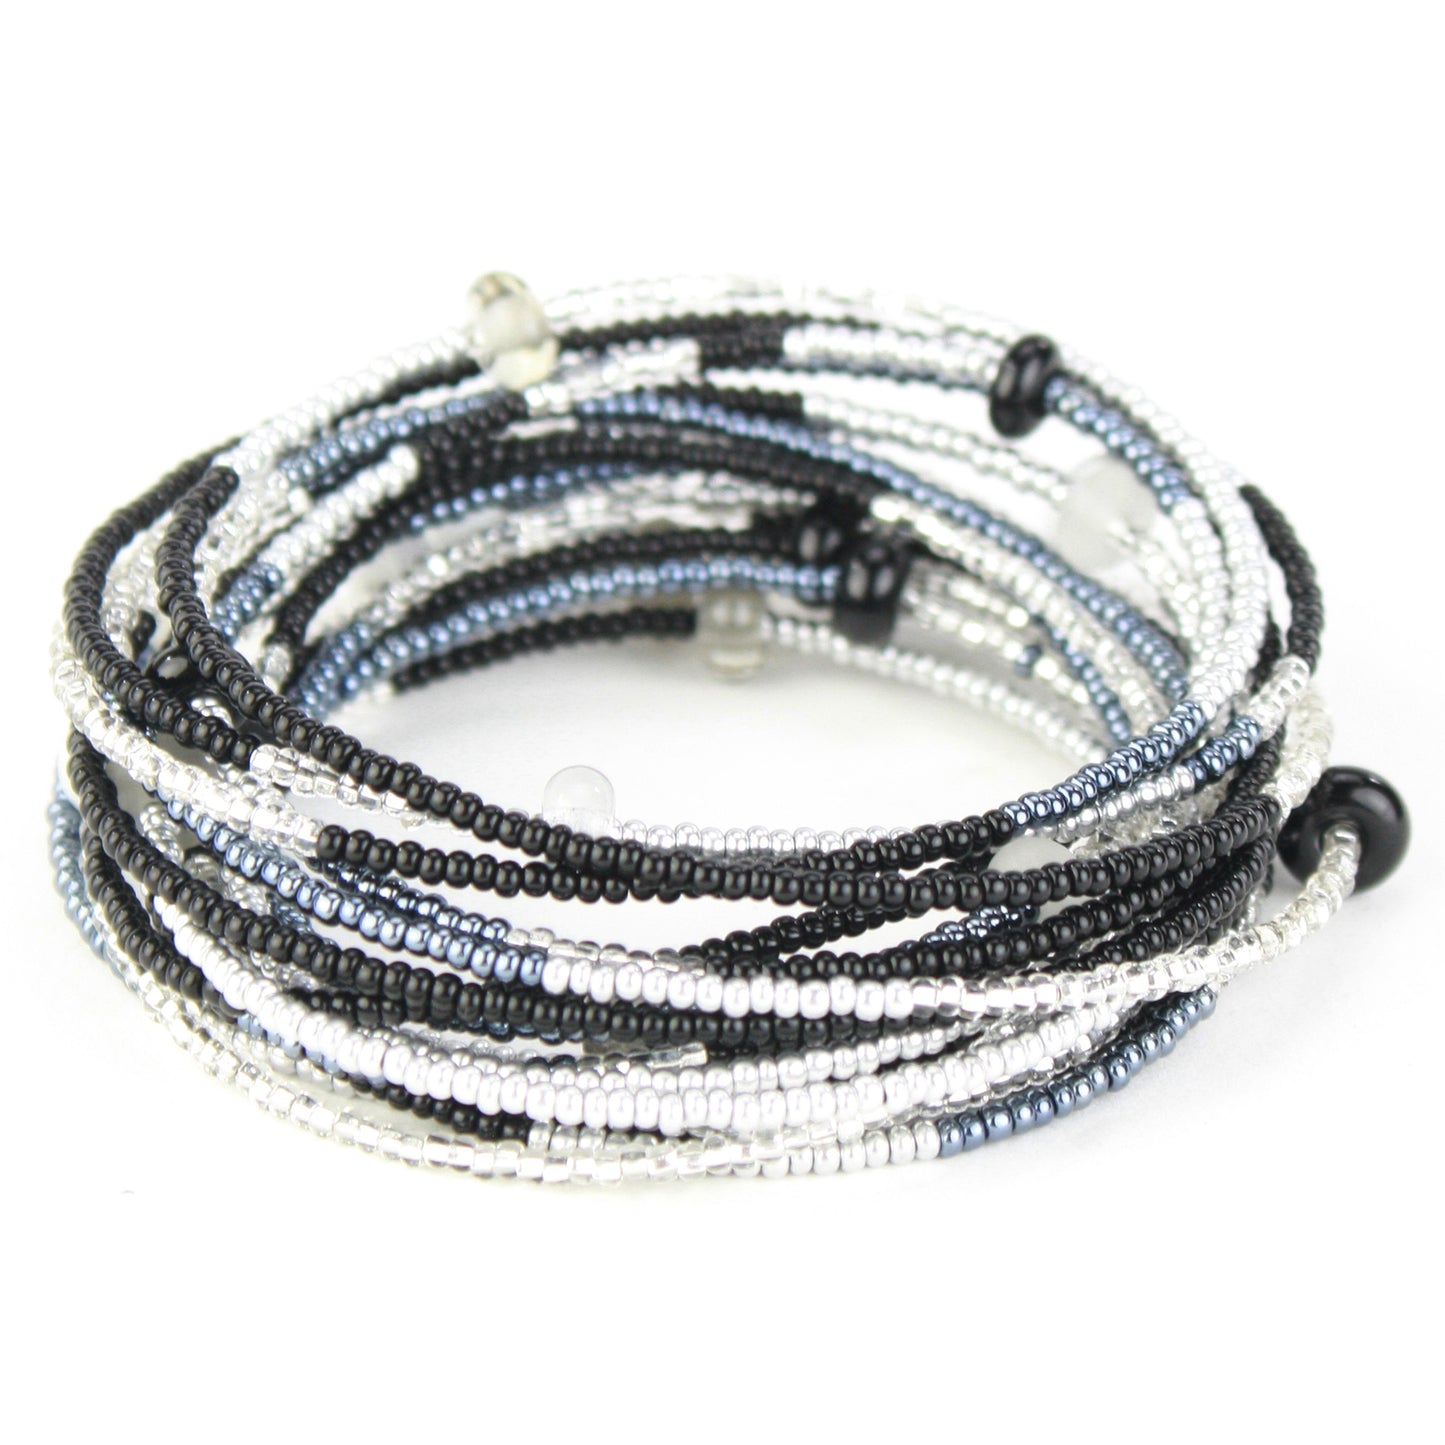 12 foot necklace - Black, white and silver